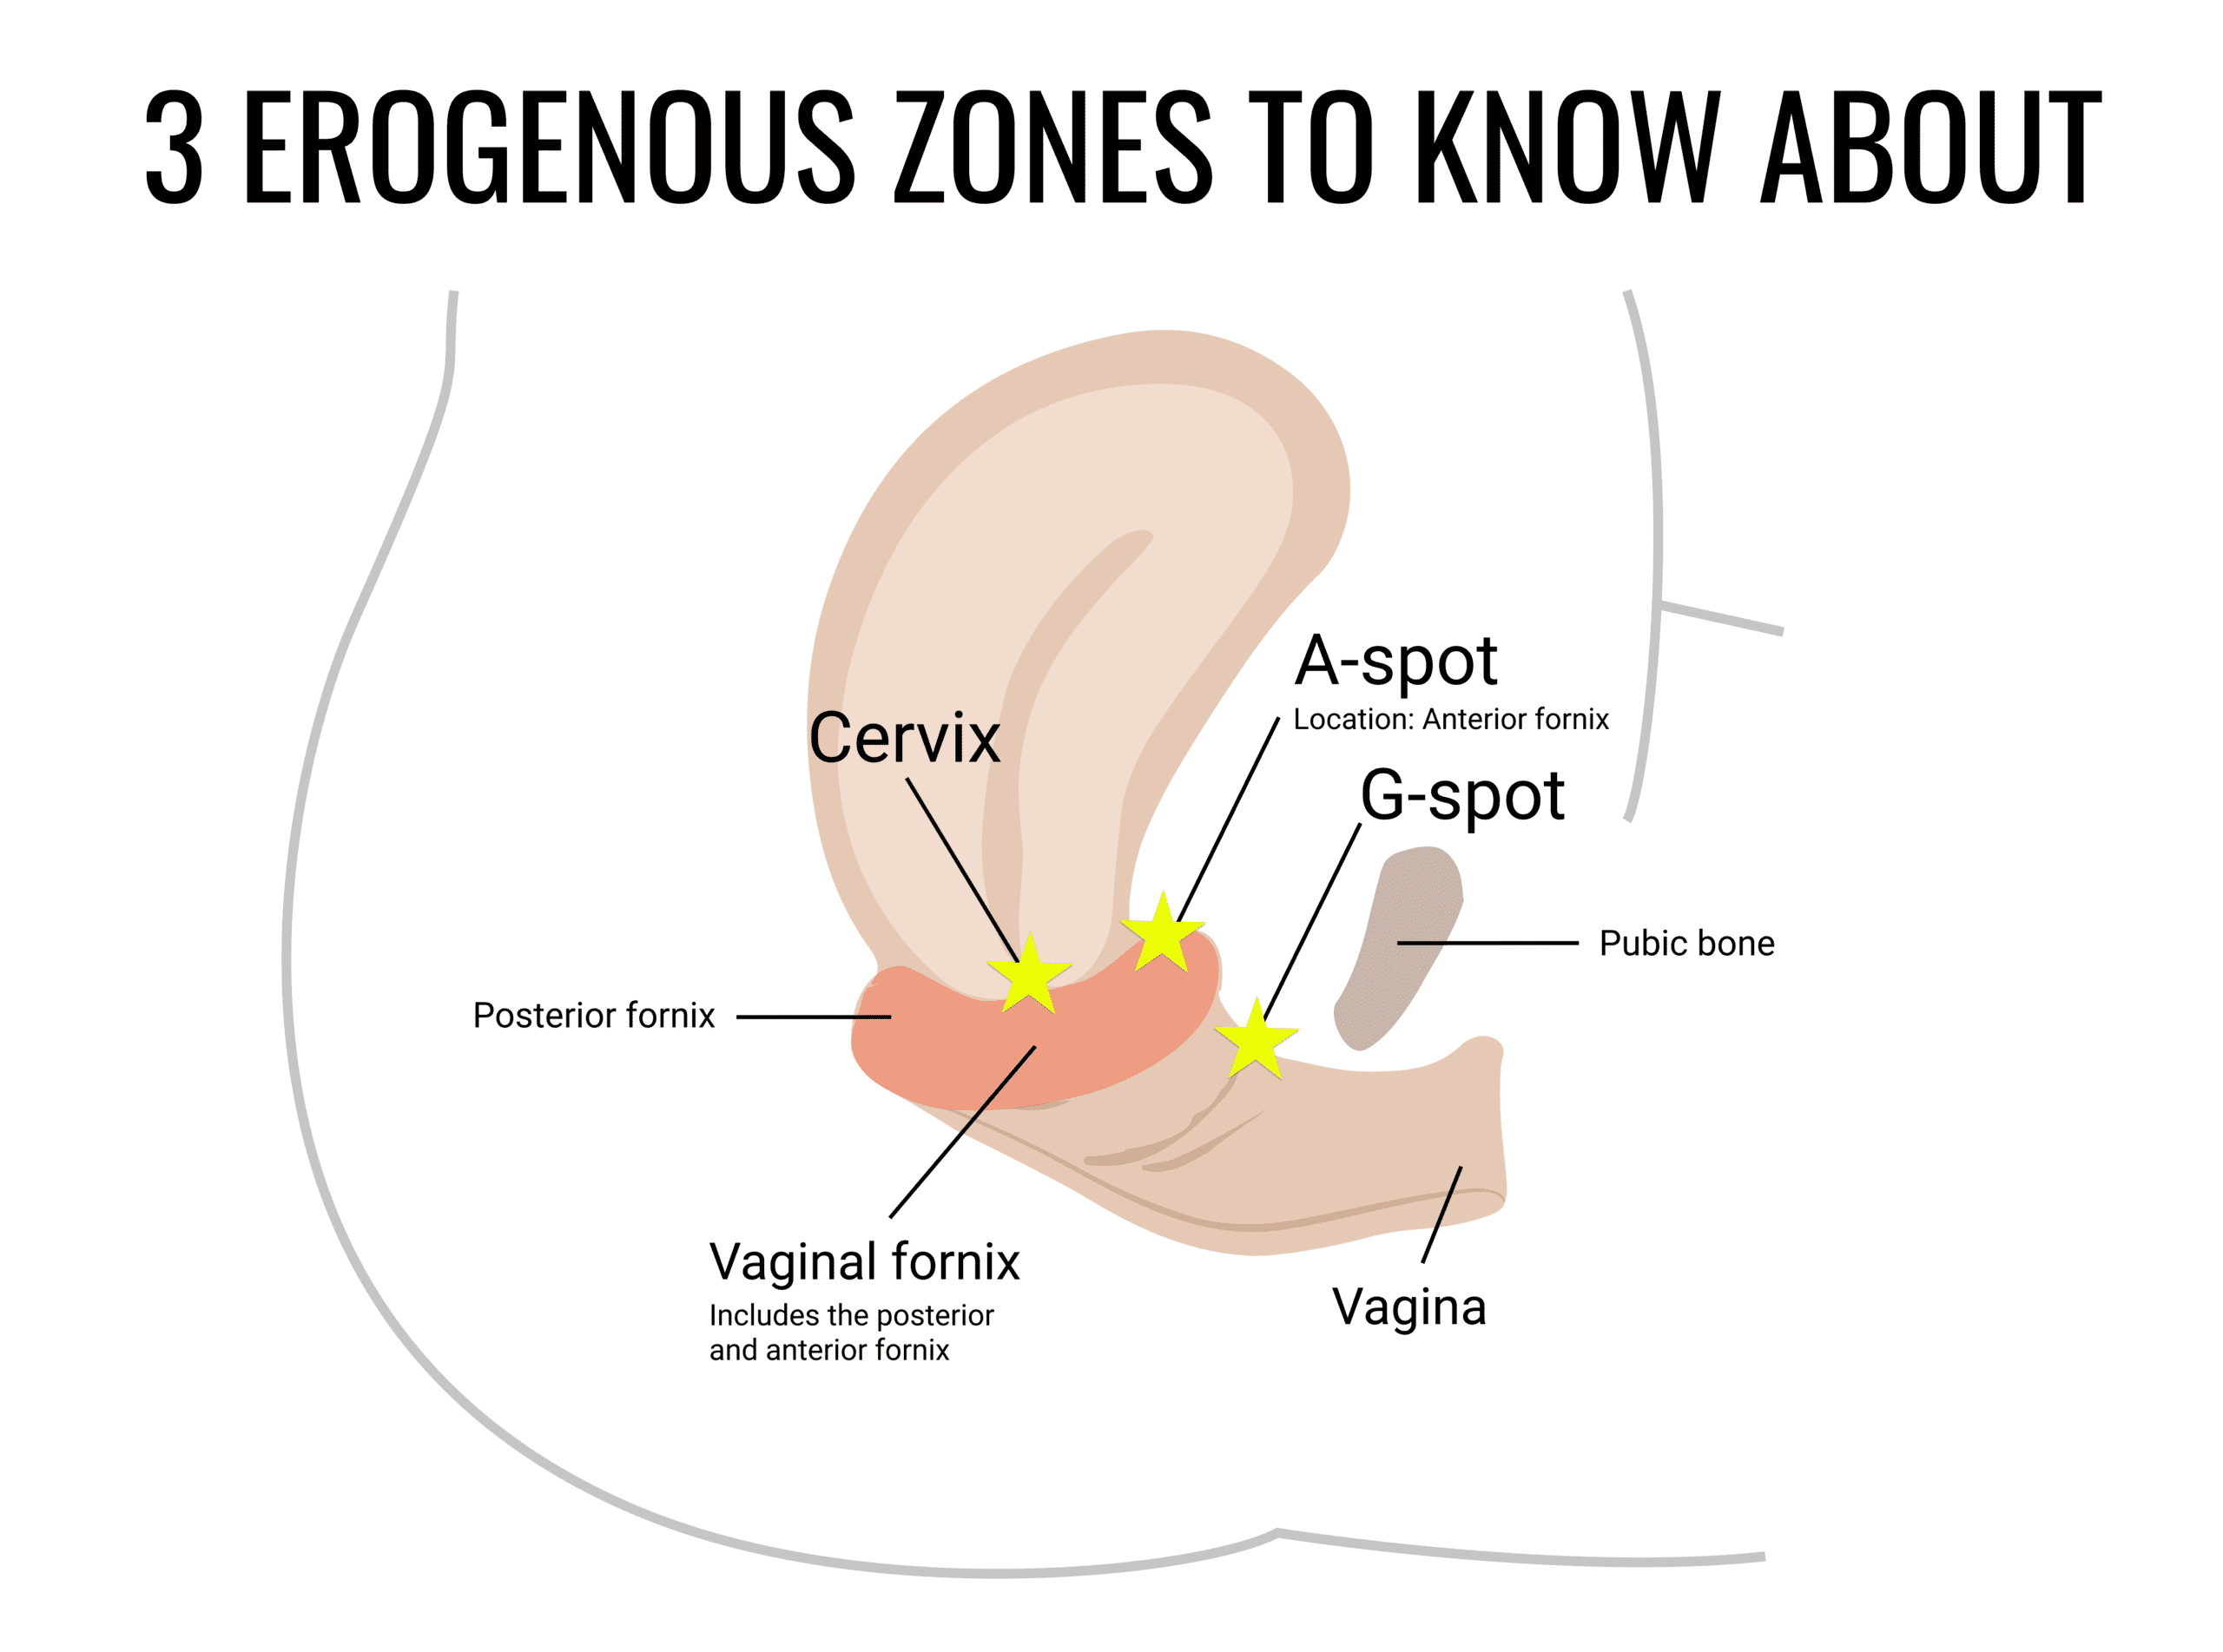 3 erogenous zones to know about the cervix the g-spot and the a-spot